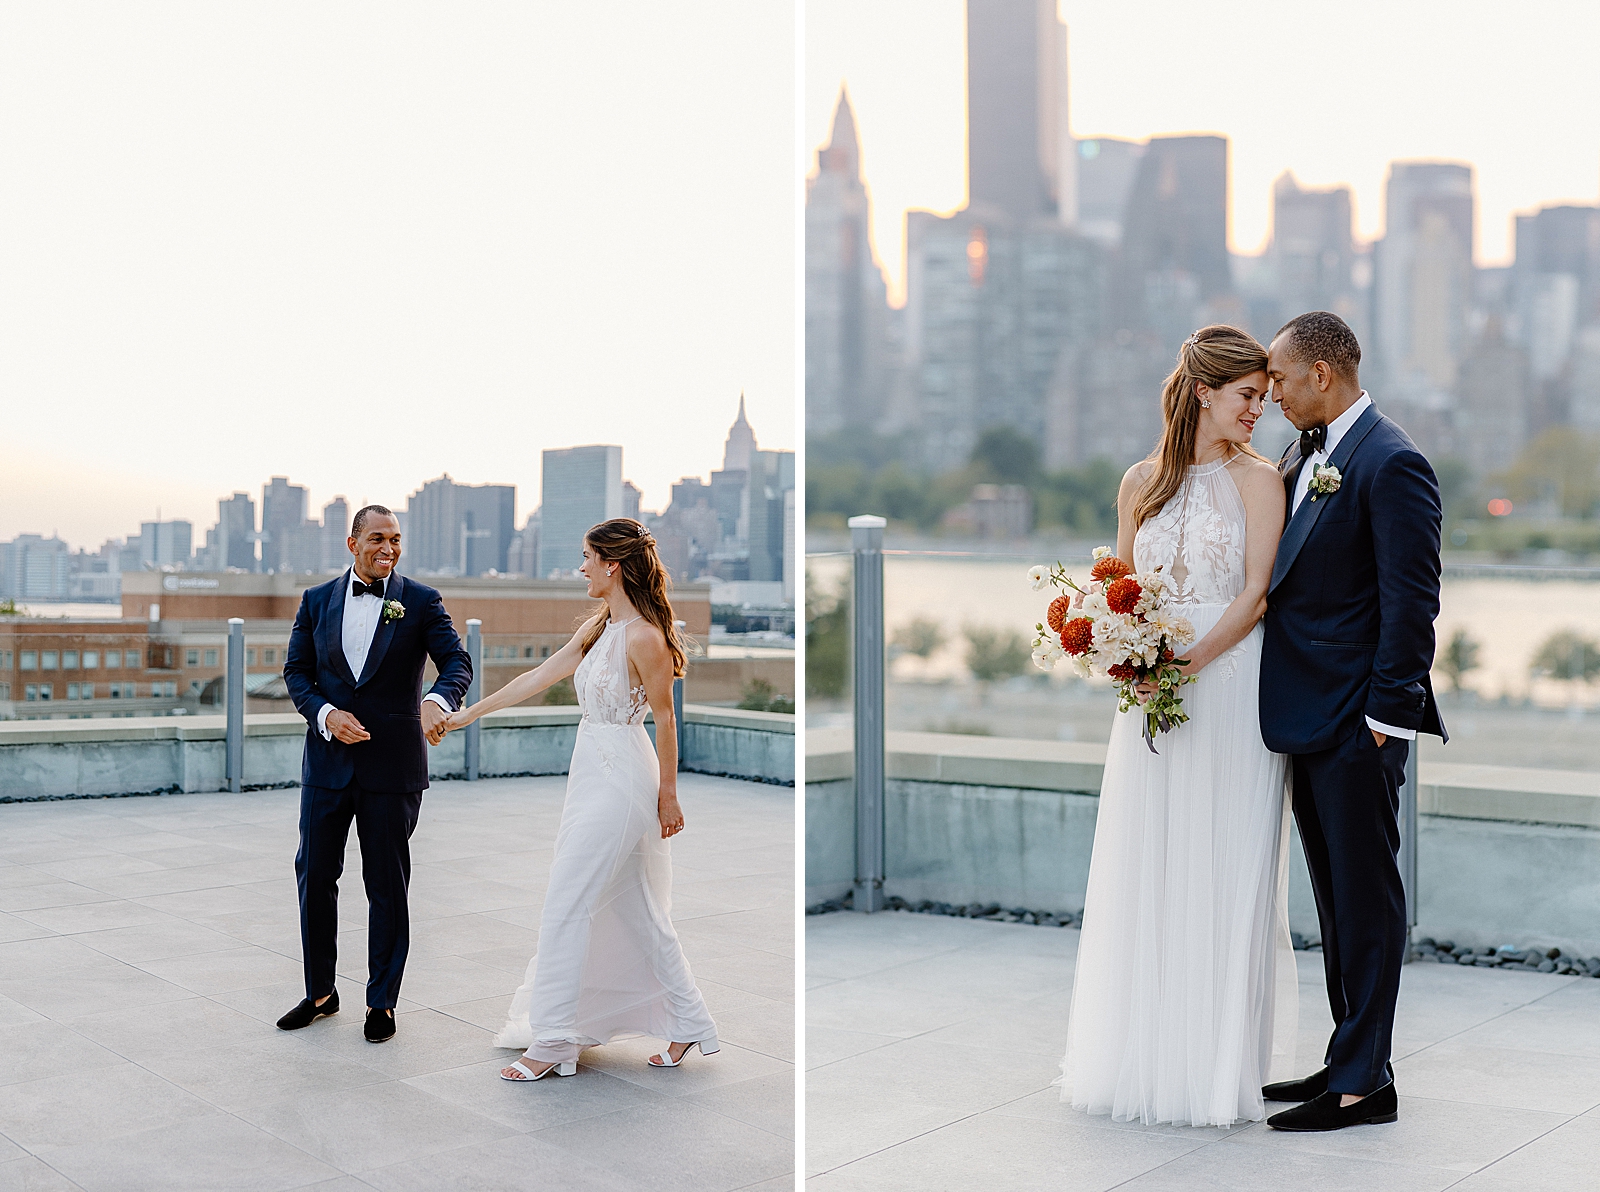 Bride and Groom dancing on outdoor deck with Empire State Building view